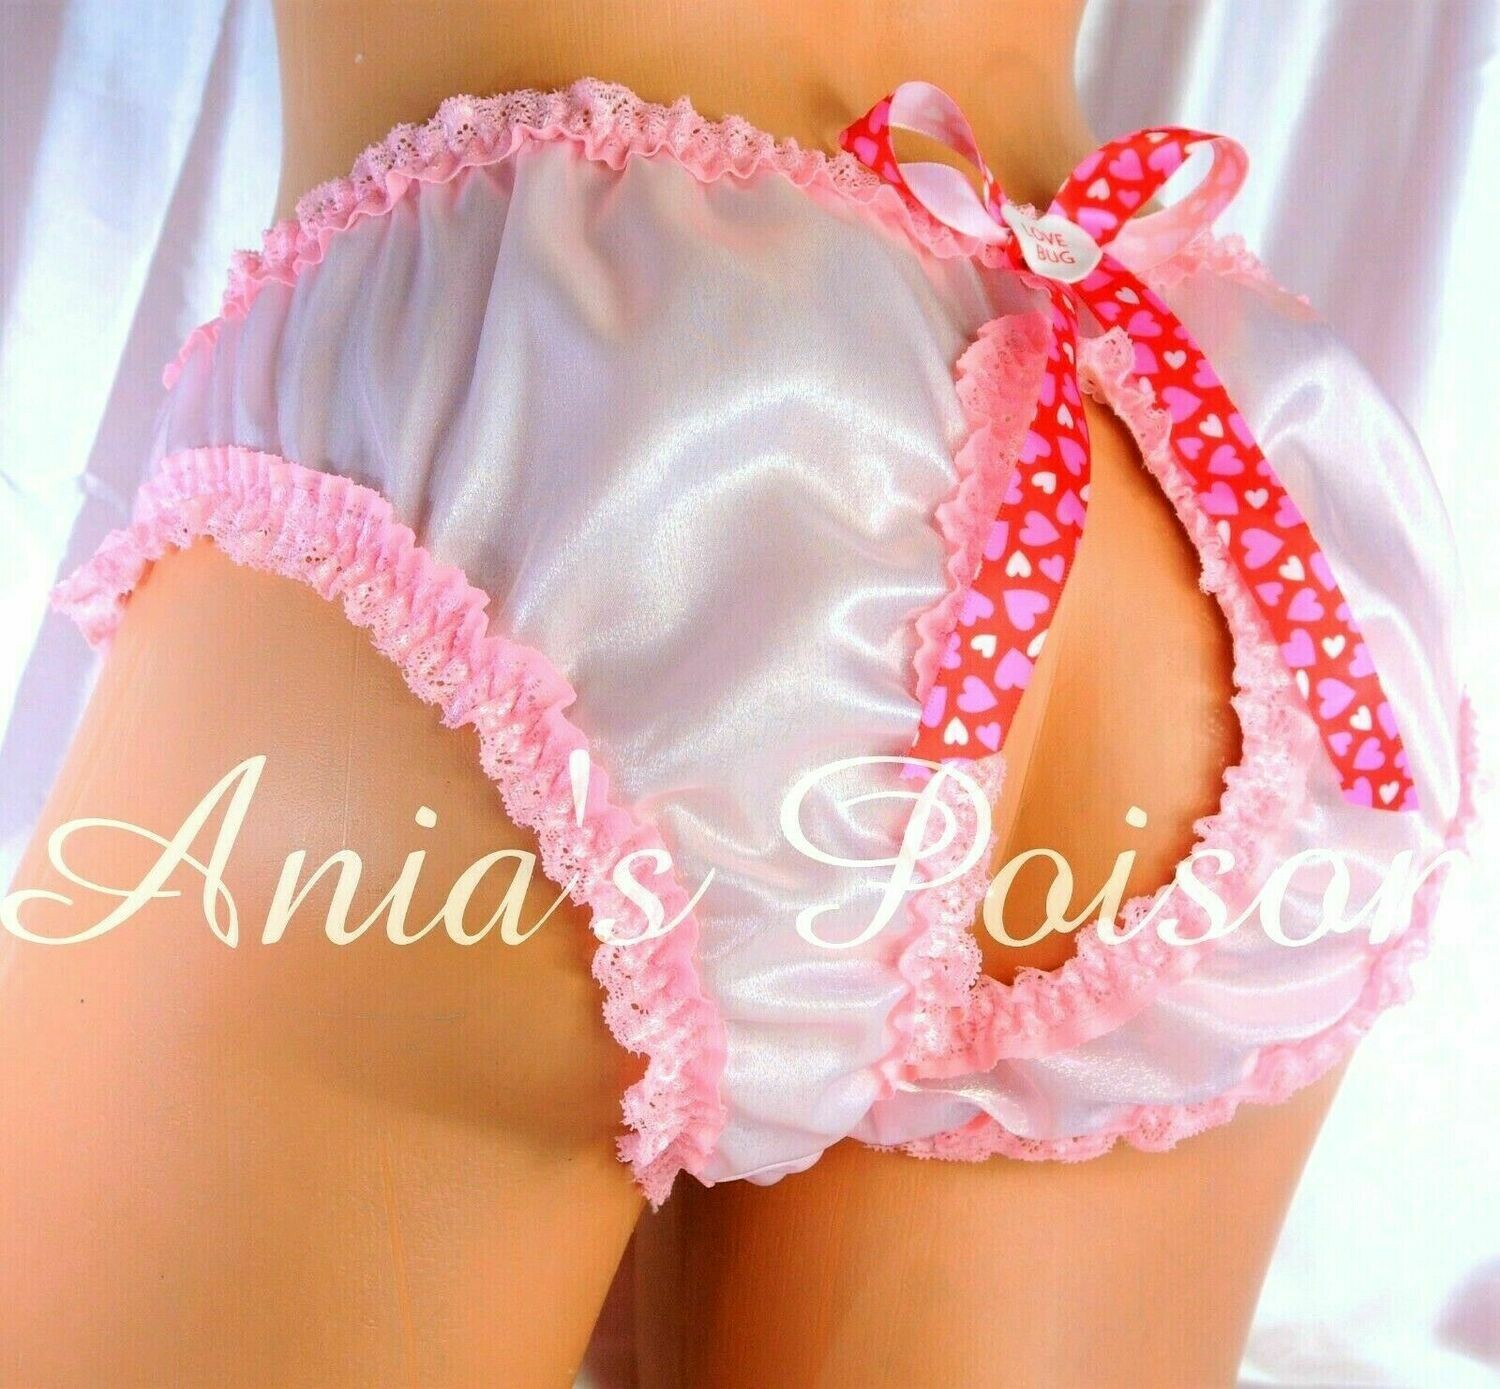 Anias Poison Unisex open crotch crotchless butterfly Stiff Pink Punishment MAID PINK Lace sissy ruffled panties